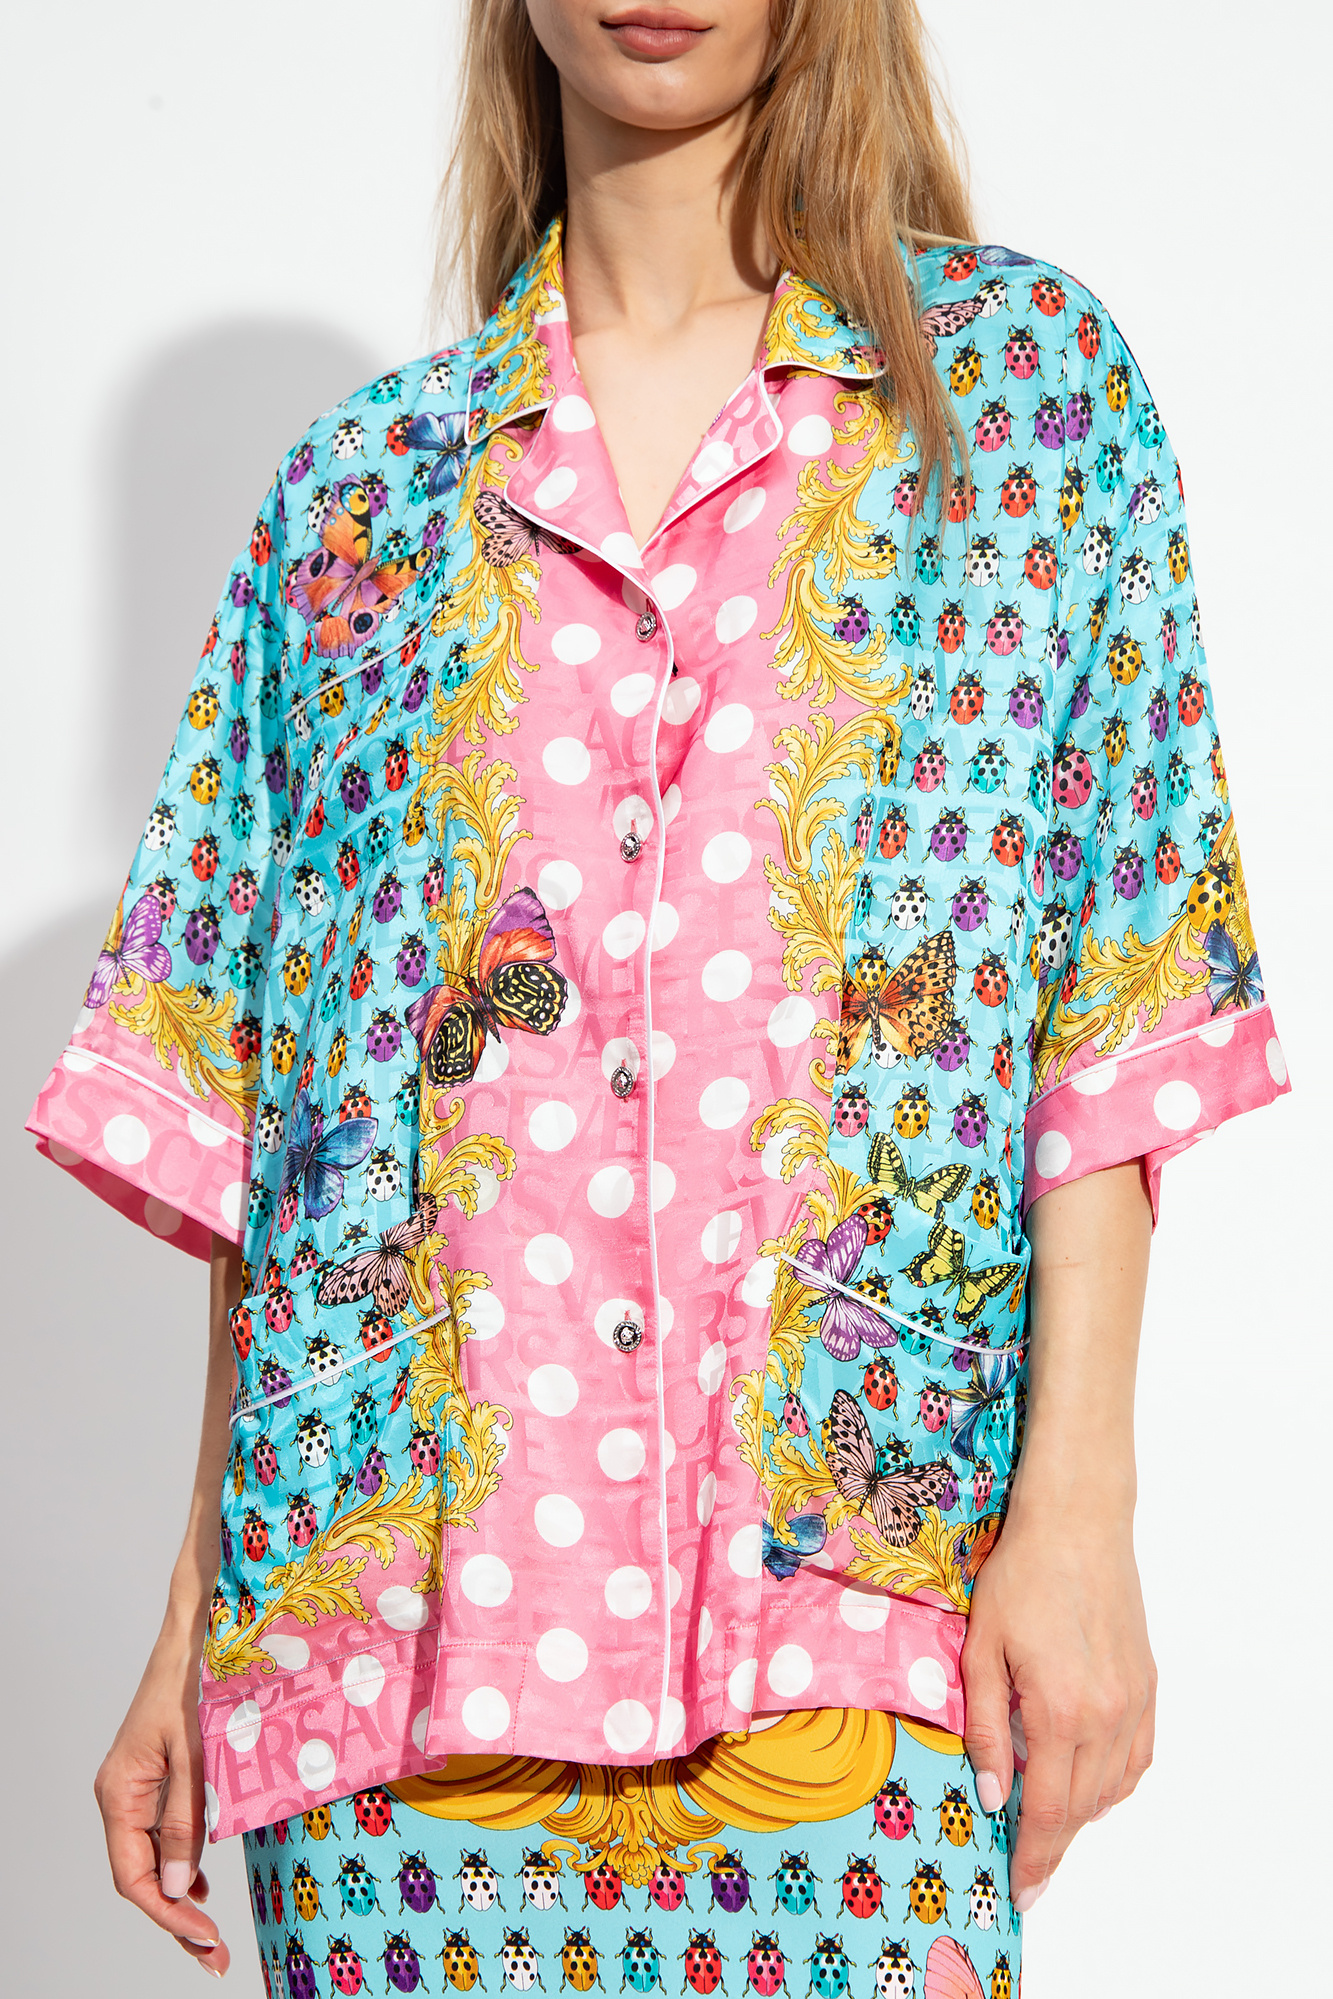 Versace ‘La Vacanza’ collection patterned shirt